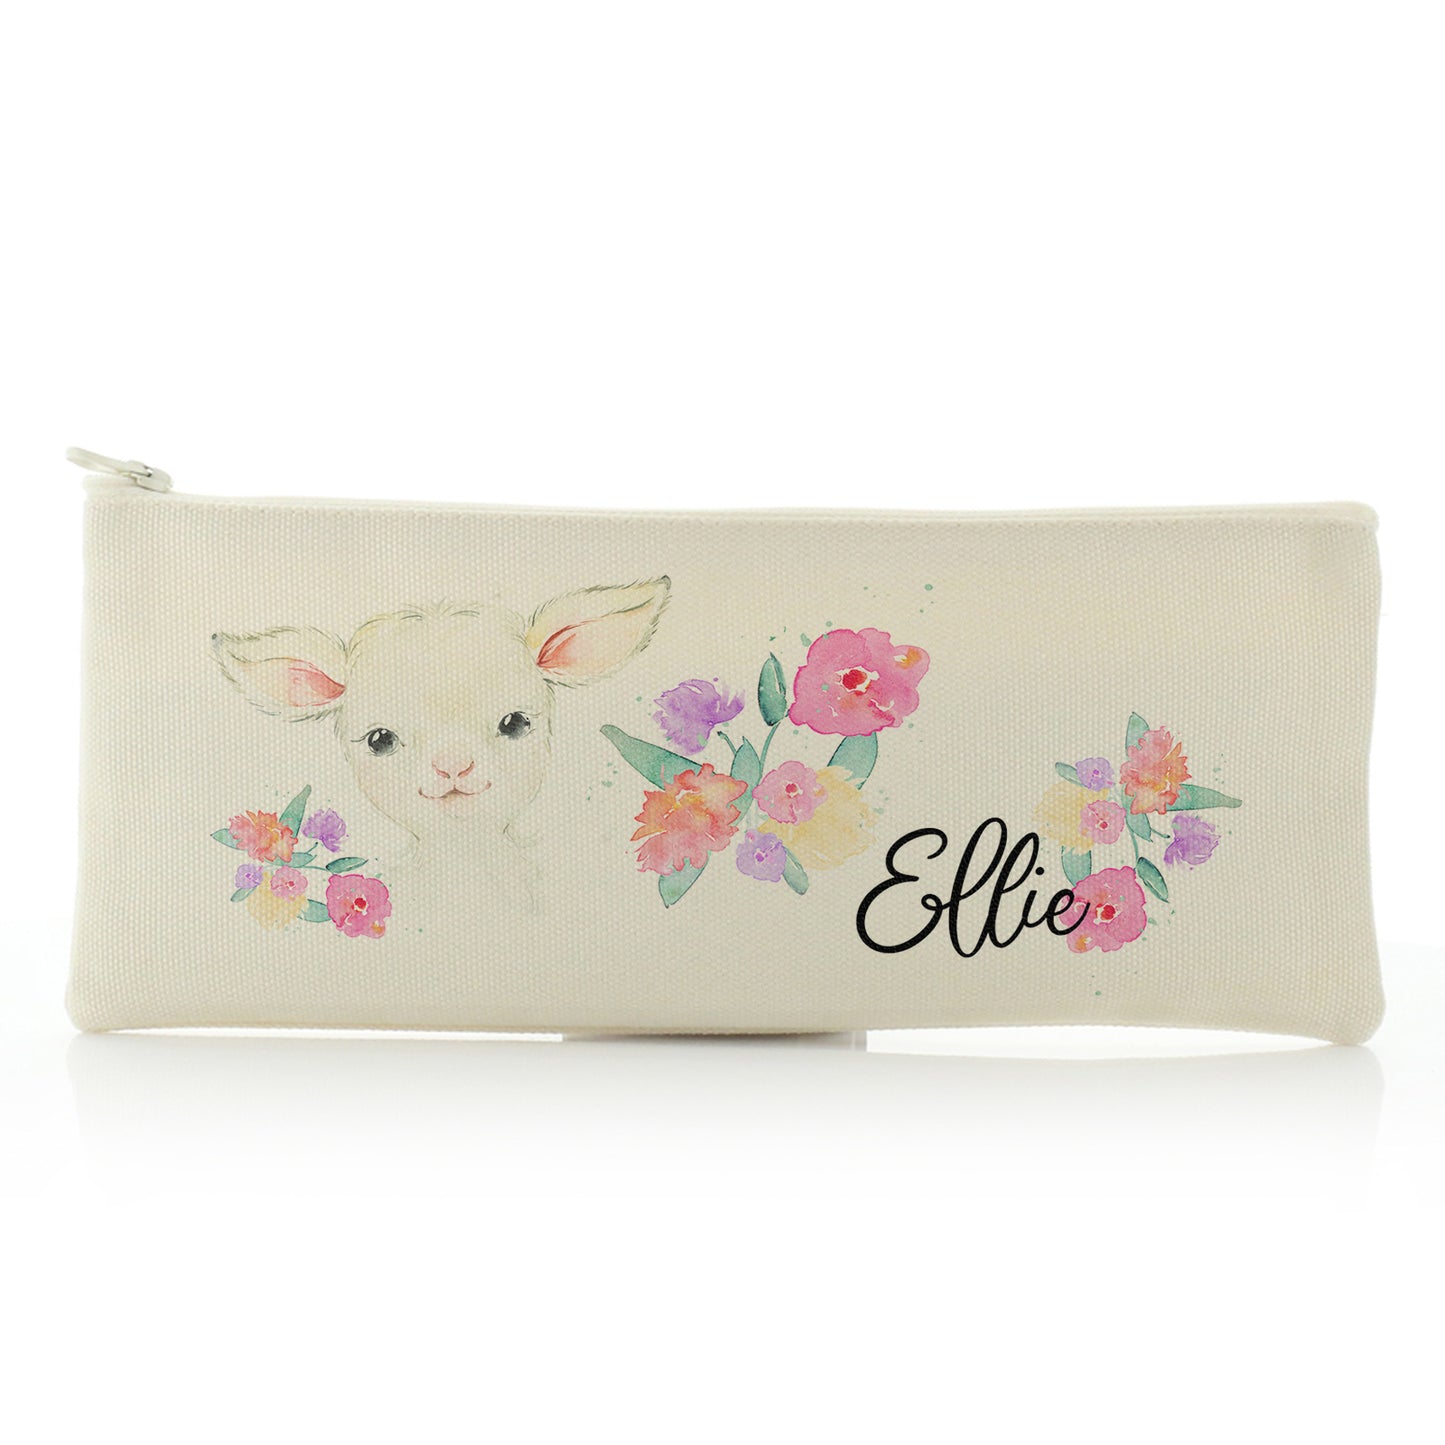 Personalised Canvas Zip Bag with White Lamb Flowers and Cute Text